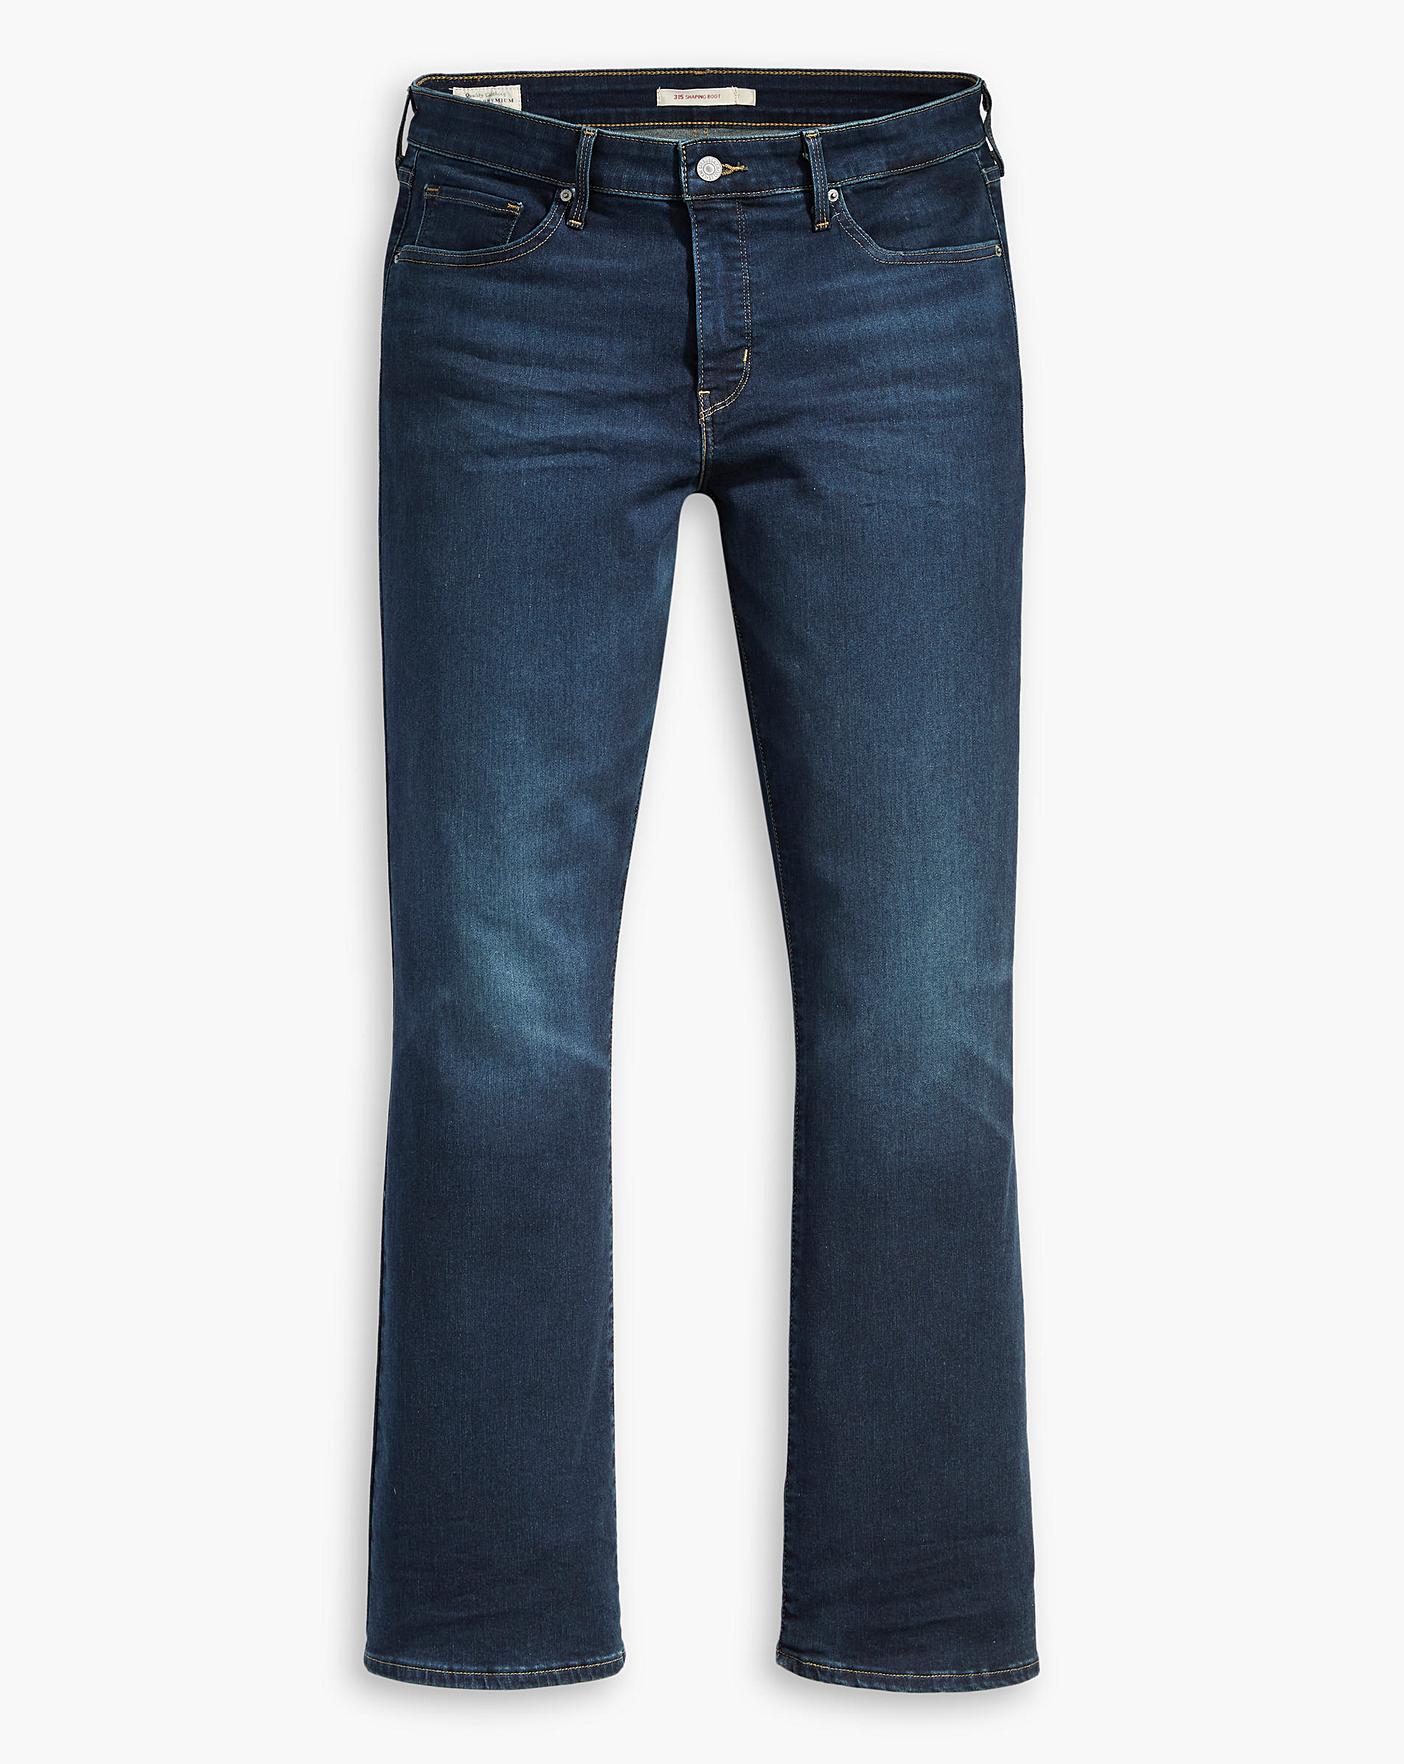 Levi's 315 Shaping Bootcut Jeans | Simply Be